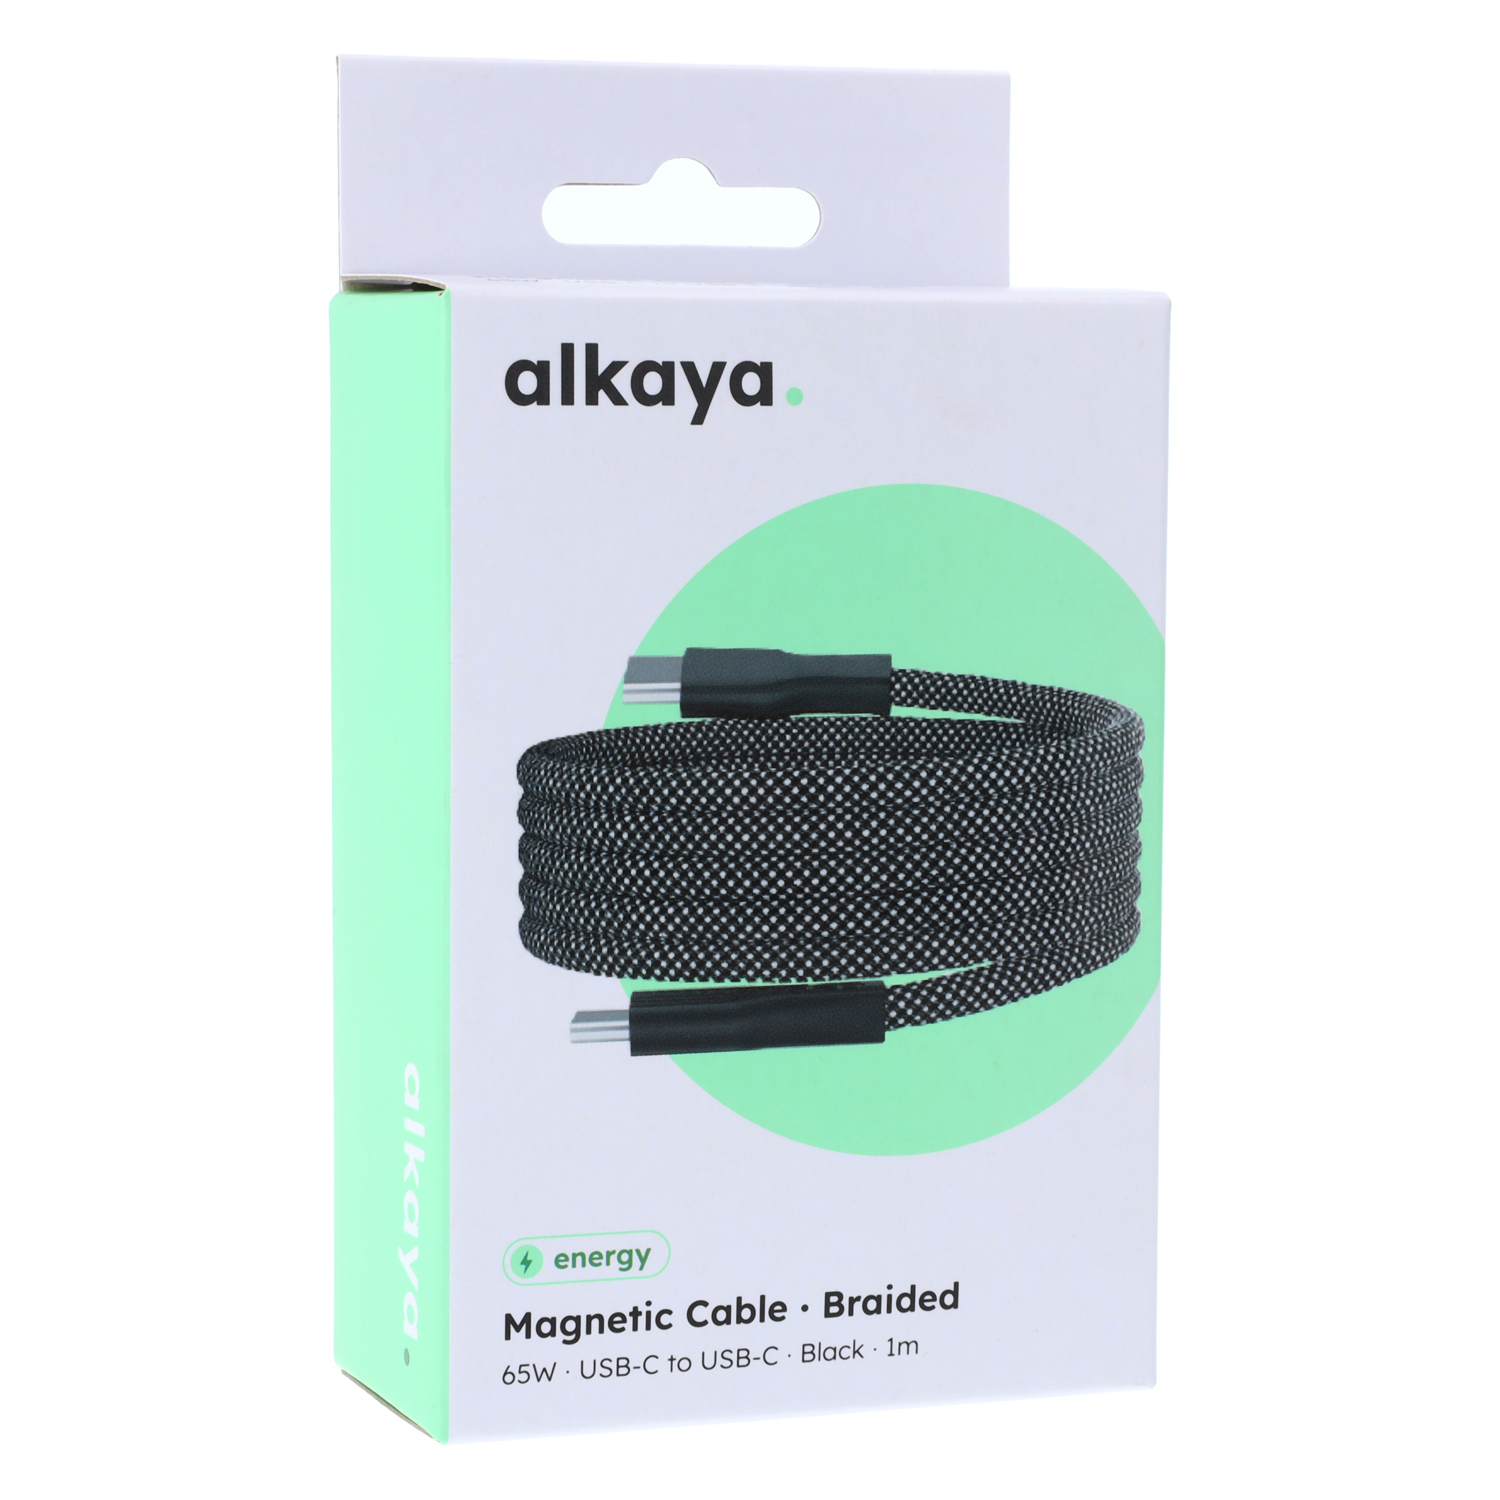 alkaya. | Speed Flex Magnetic Data Cable Braided Universal compatible USB-C to USB-C | 1m | 65W, black